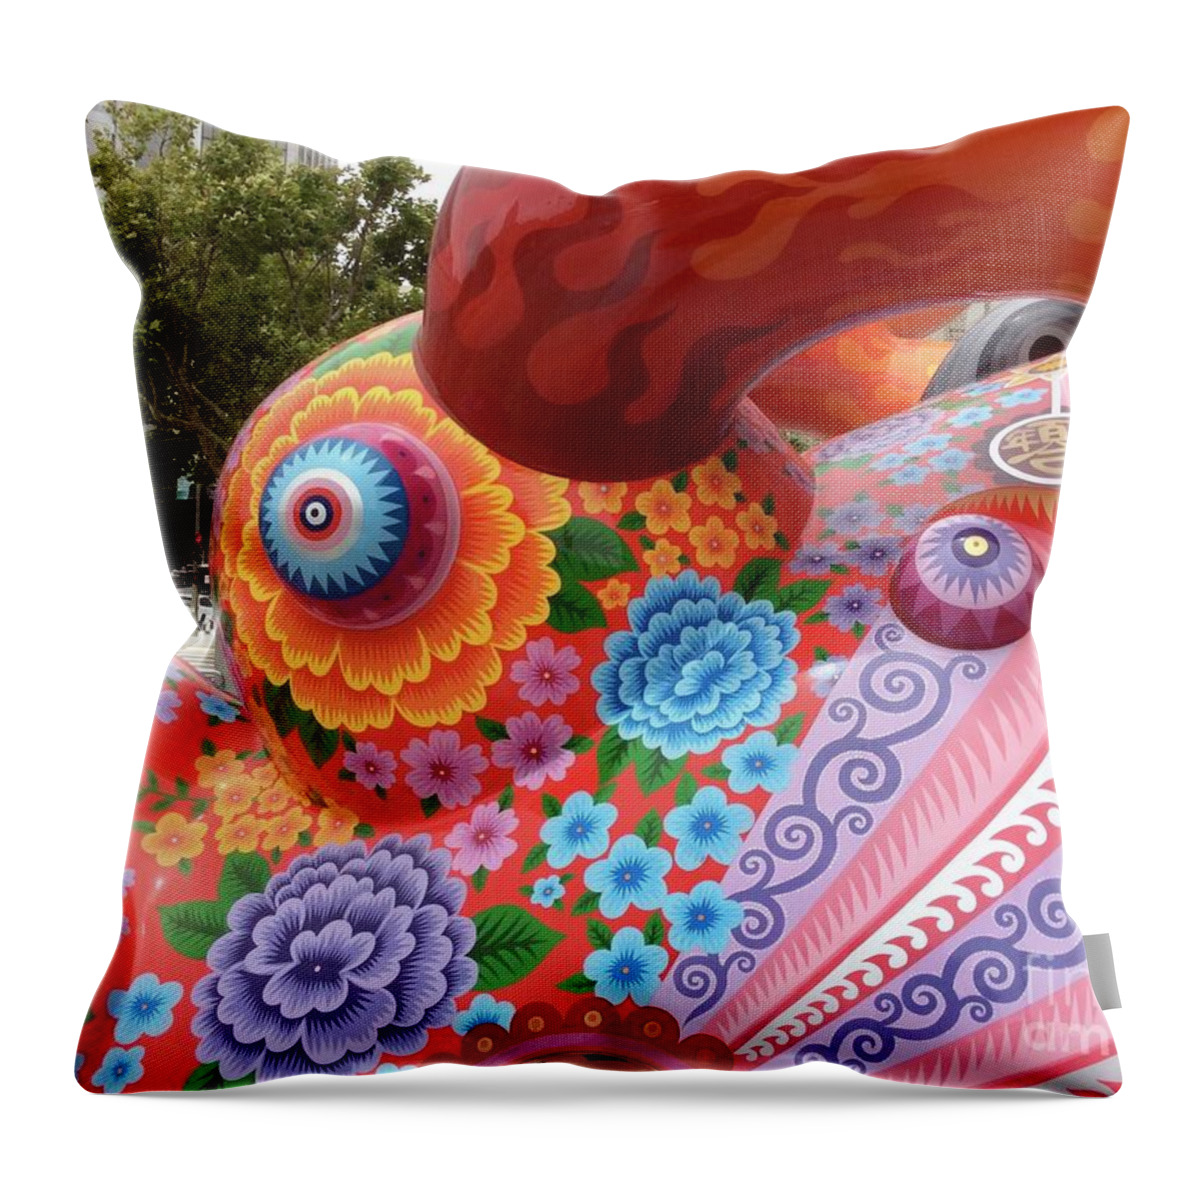 Fantastical Throw Pillow featuring the photograph Fantastical Creature 1-4 by J Doyne Miller